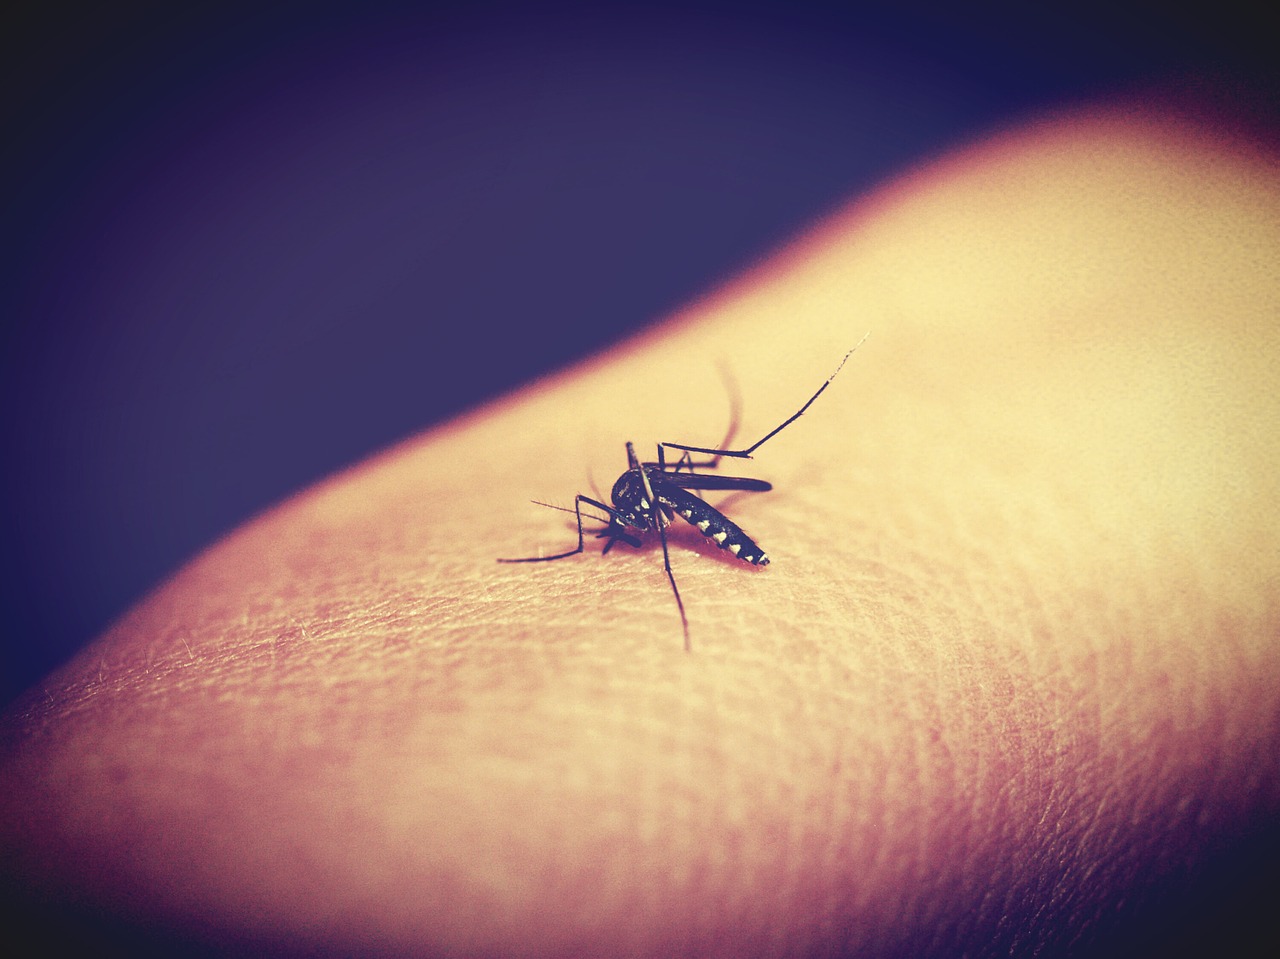 The Fever How Malaria Has Ruled Humankind for 500,000 Years